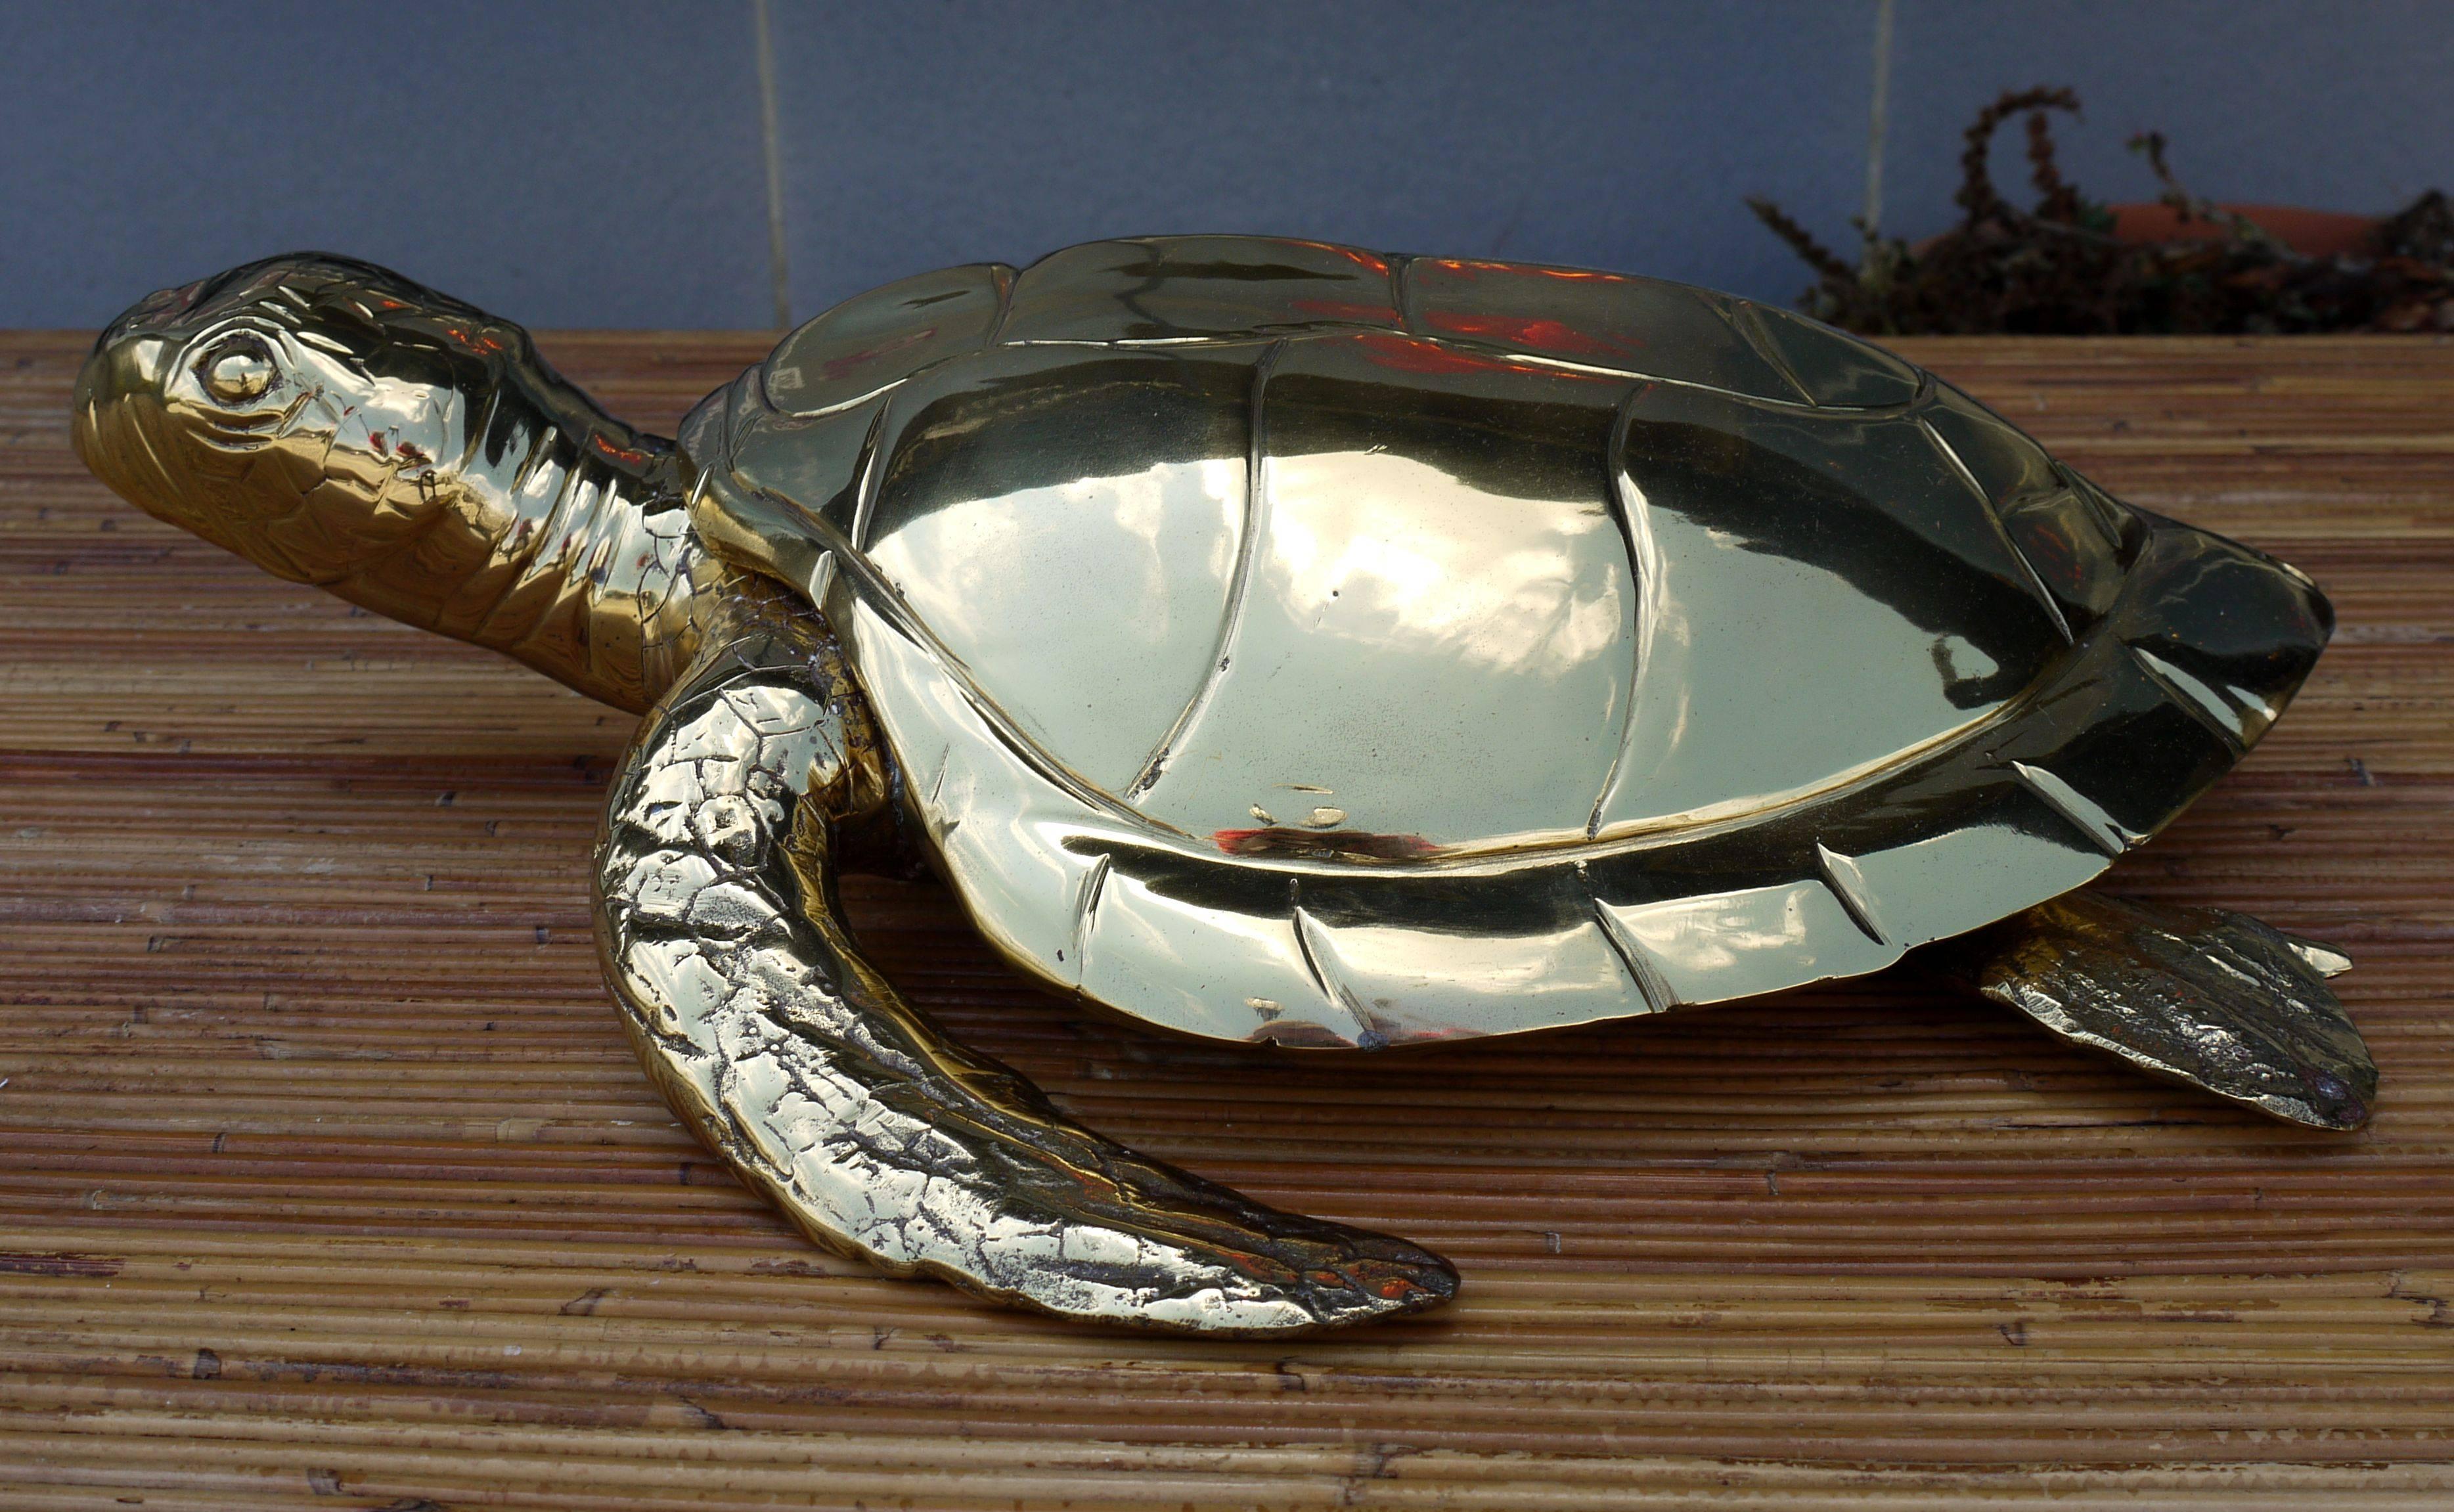 Amazing large scale high polished brass sea turtle box. Great design to it. Great scale for use on a coffee table or entrance table to hide your keys or whatever.